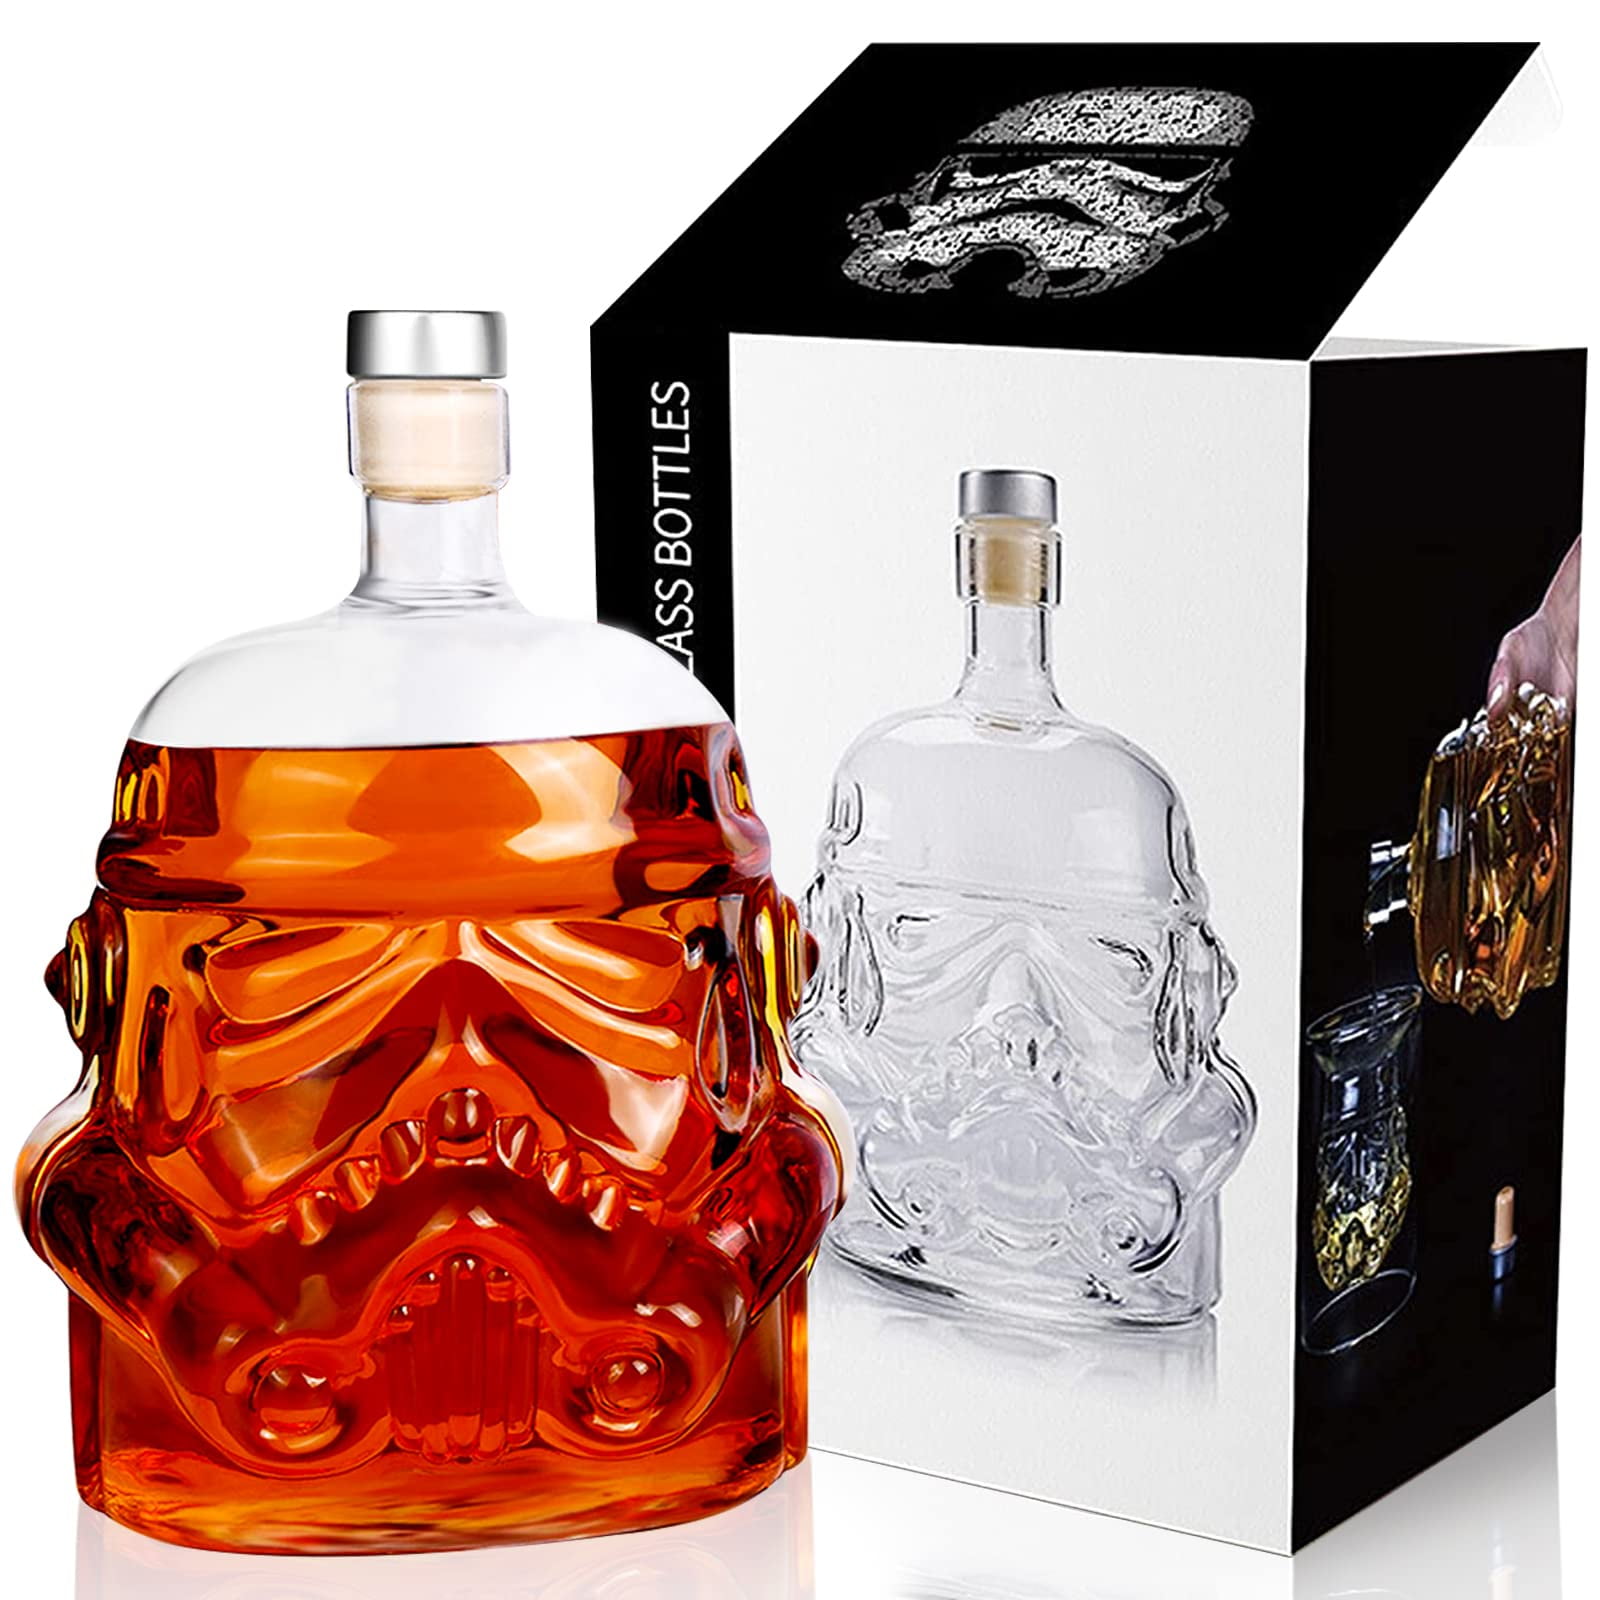 Star Wars Scene Decanter Box Sets Can Be Personalised 